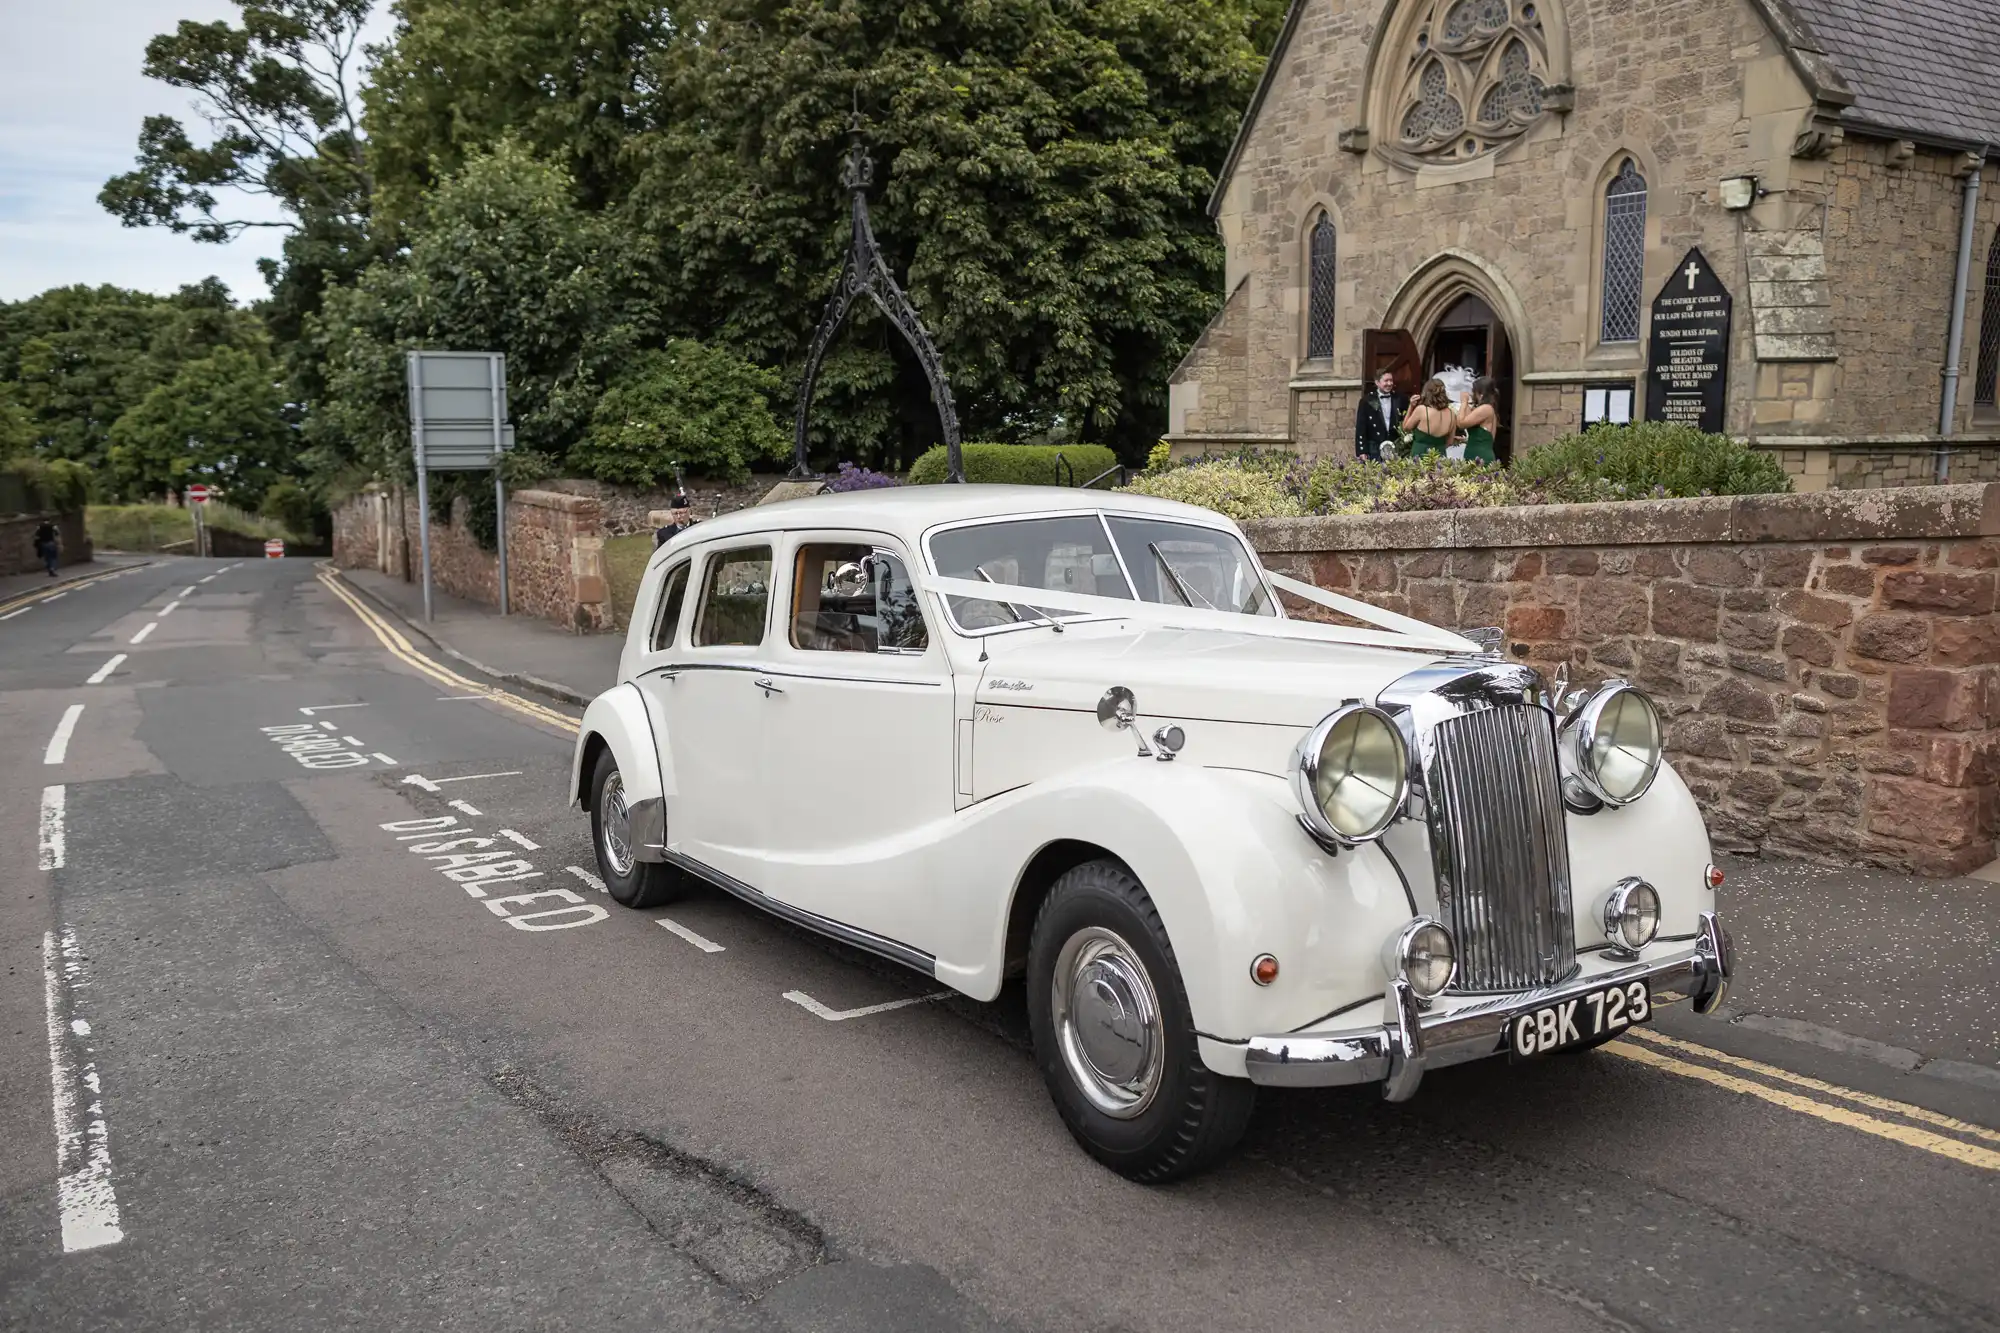 Vintage white car parked on a street next to a church, with a "Just Married" sign and decorations, and a couple visible in the church window.